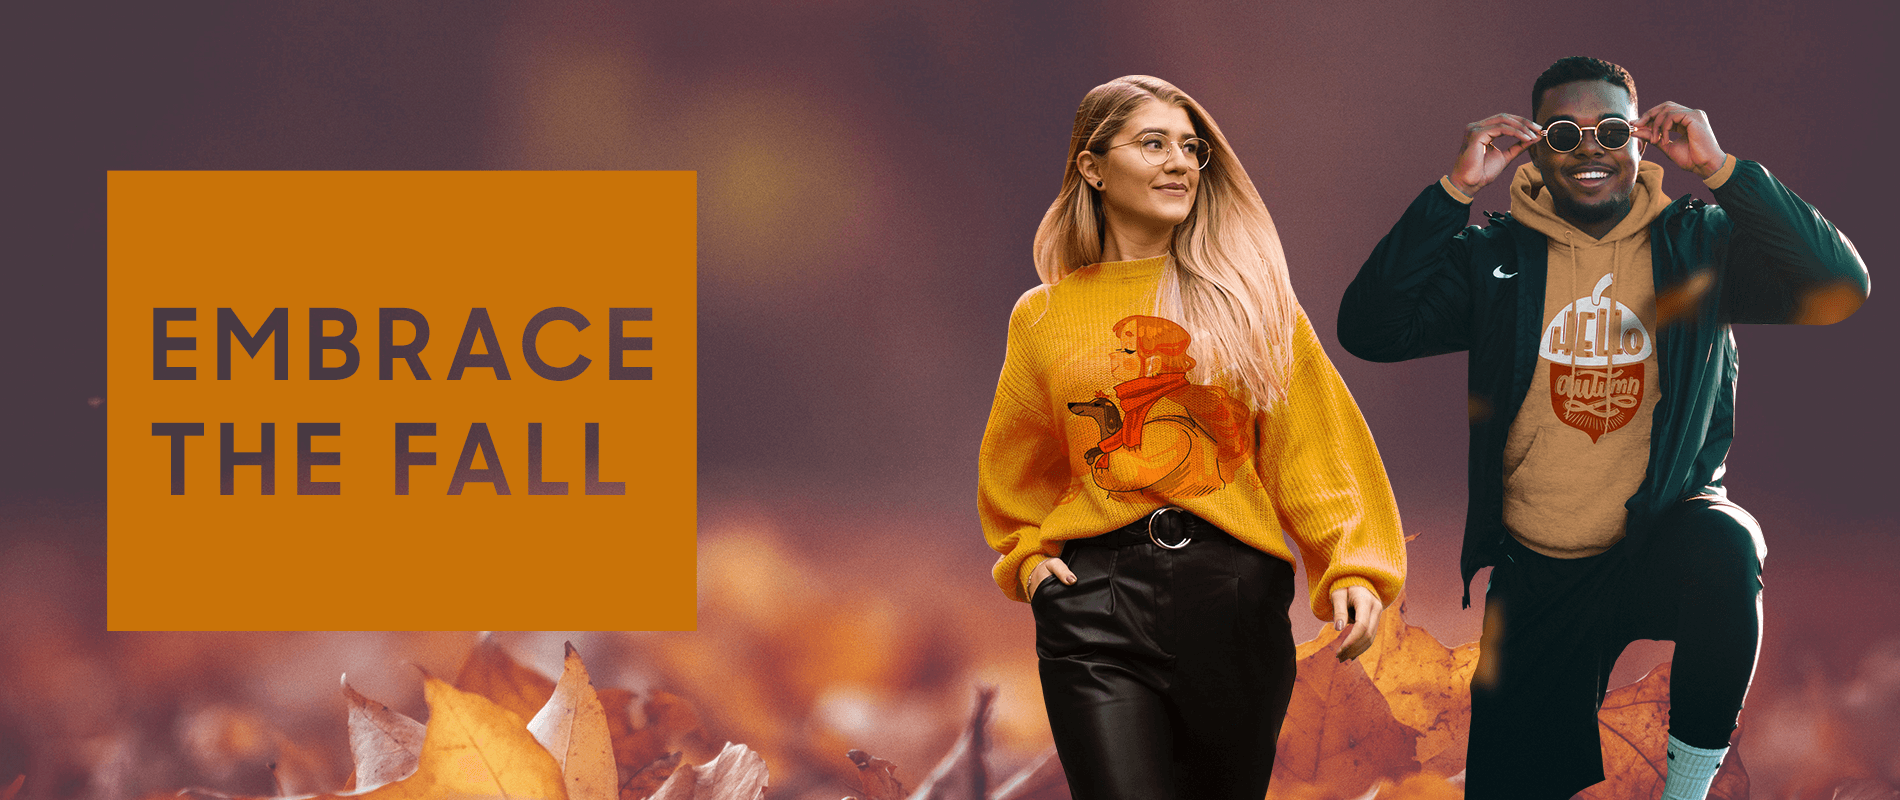 Embrace the Fall Design Challenge